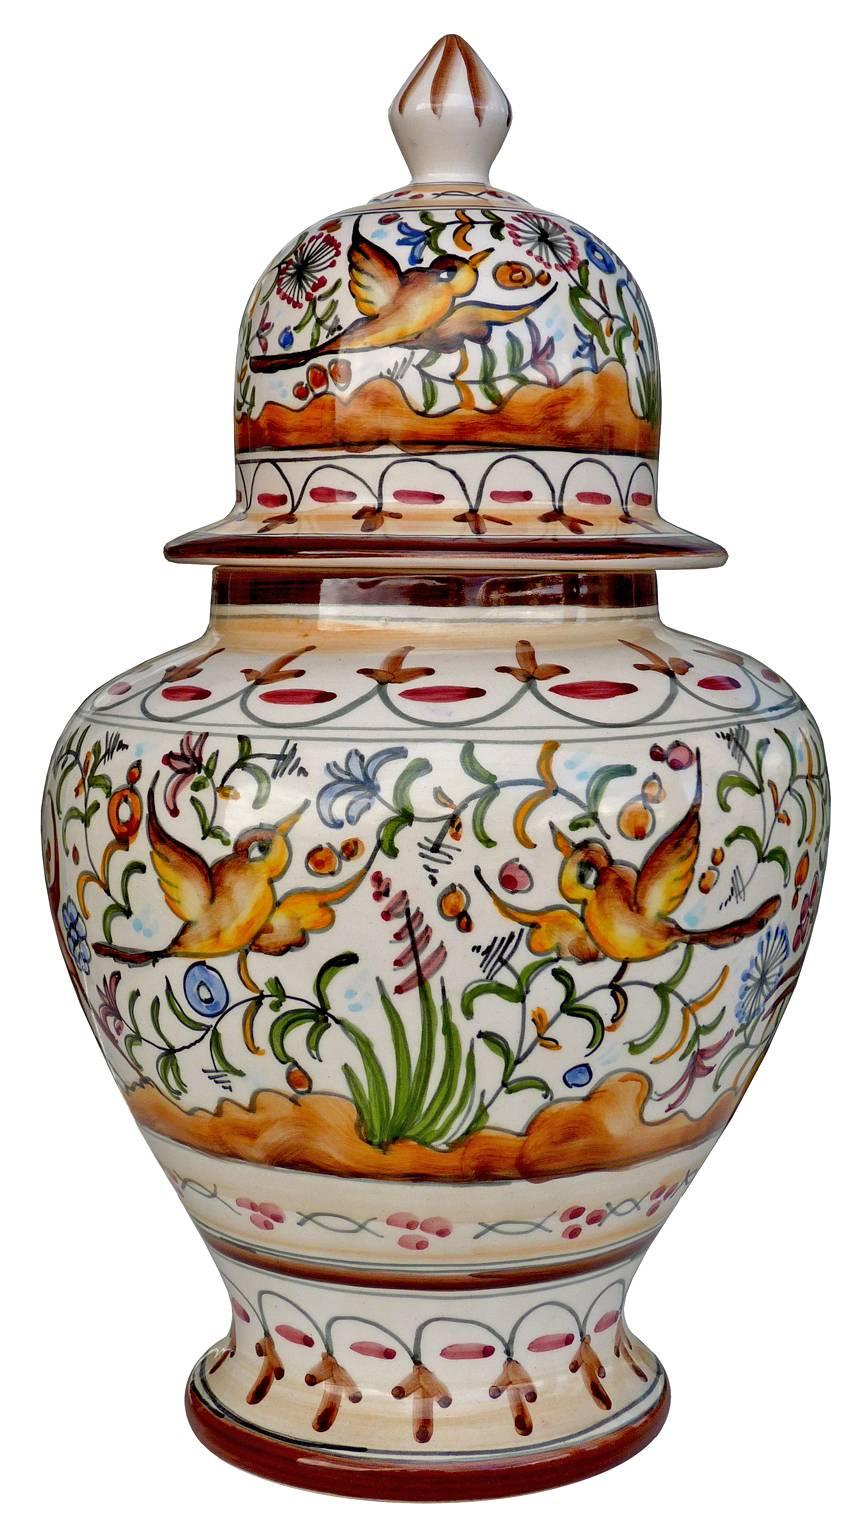 Delft polychrome Portuguese ceramic covered urn; hand-painted 17th century, tin glazed faience with floral, hunting and bird motif, early 20th century.
The intricacy of the hand-painted pattern is based on a typical Portuguese design from the 17th